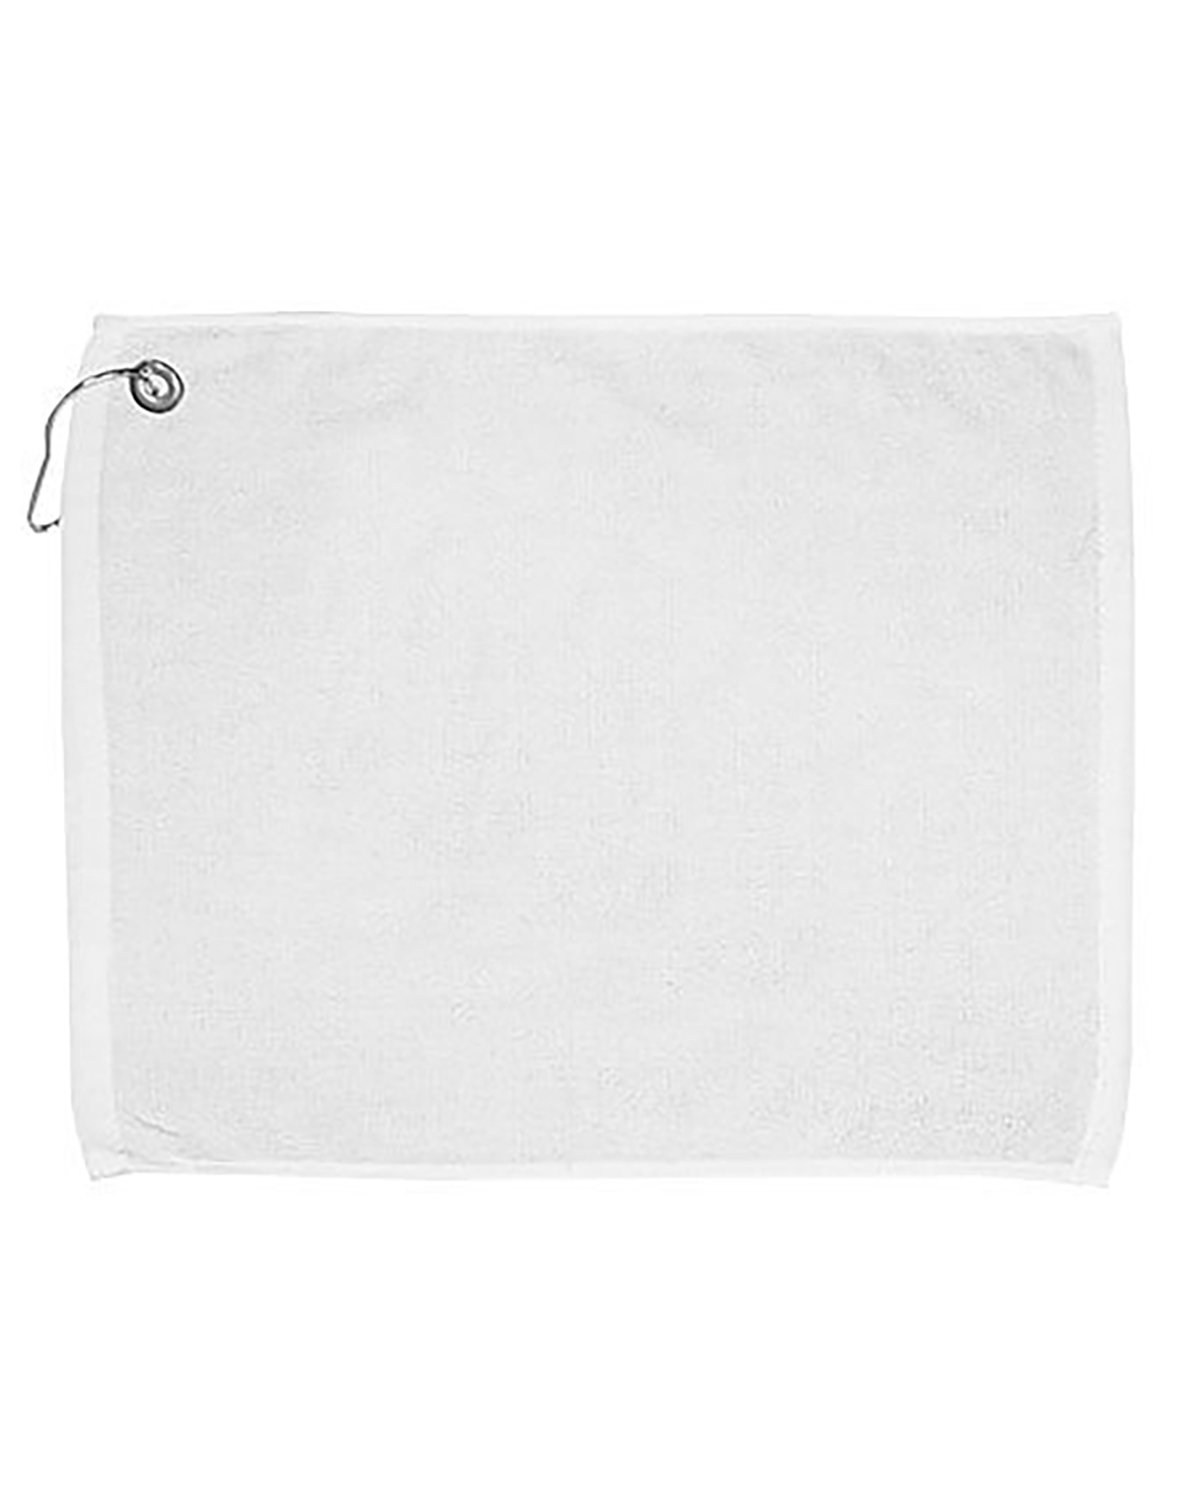 Golf Towel With Grommet And Hook-